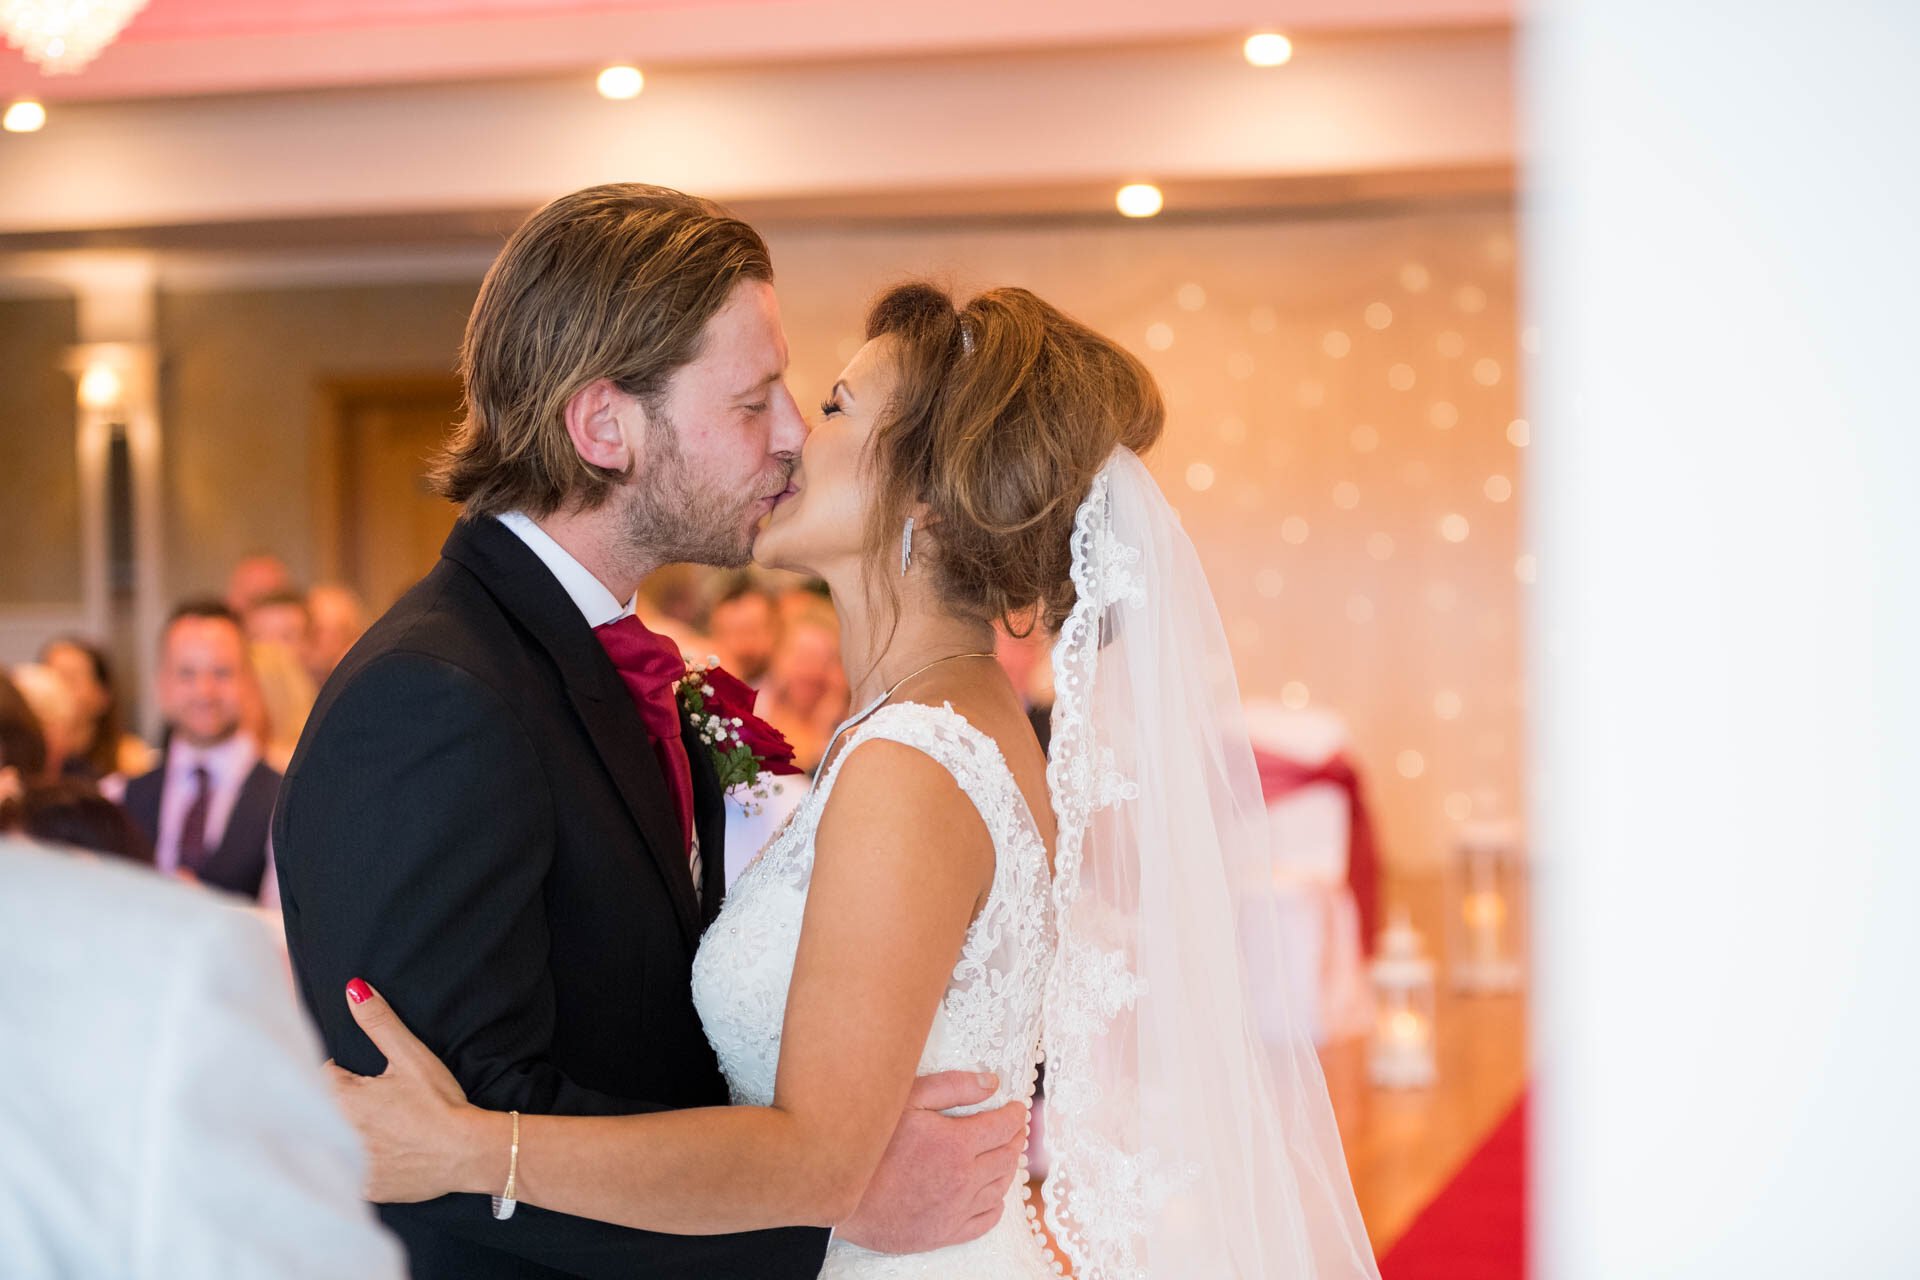 Picture of Deniz and Stevie at Killyhevlin Hotel, Enniskillen on their wedding day captured by Fermanagh, Tyrone and Northern Ireland Wedding Photographer, Trevor Lucy Photography